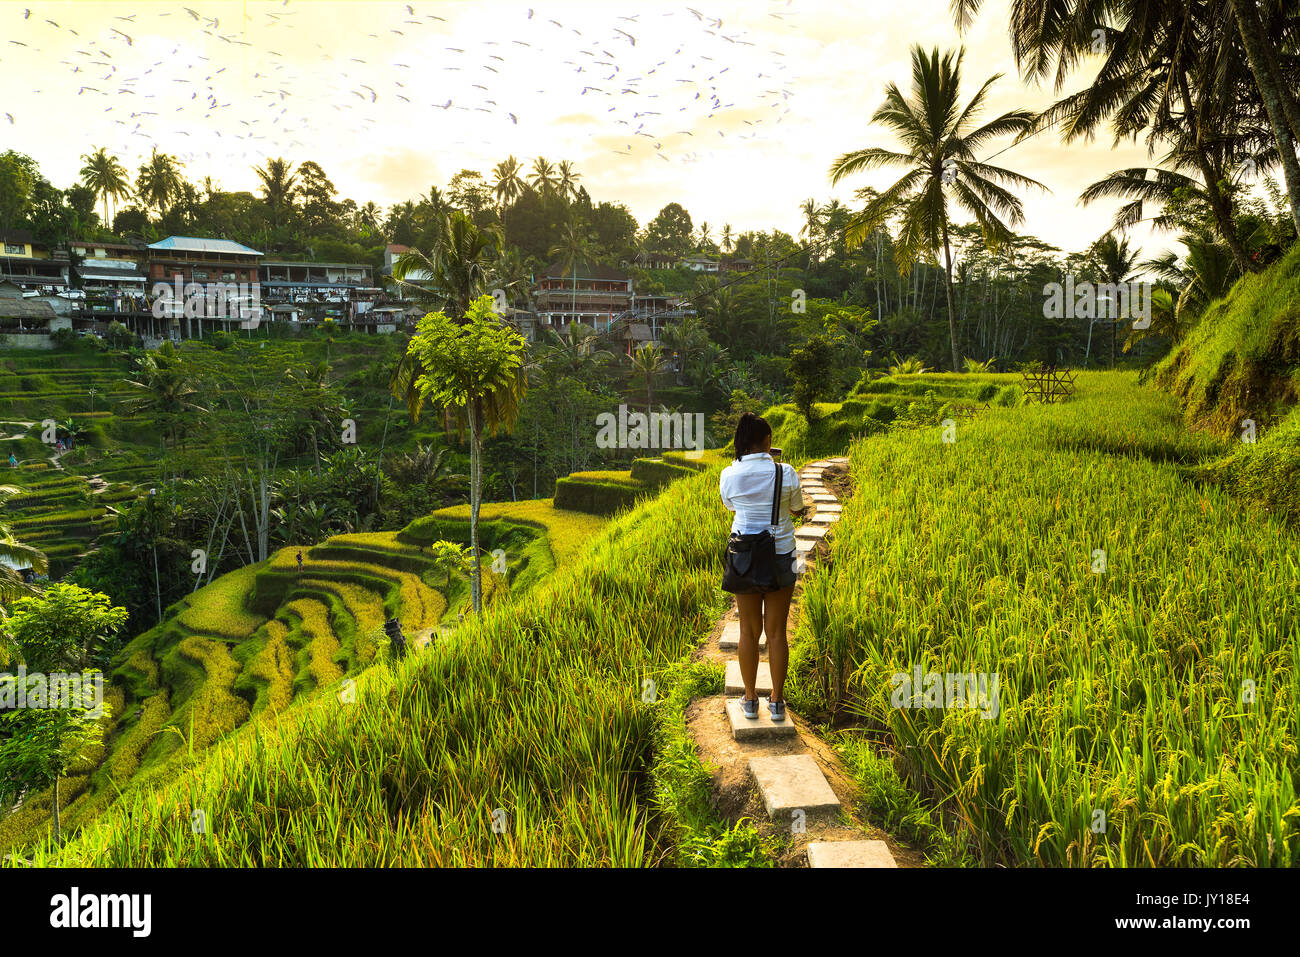 The girl who took pictures in rice fields in Tegalalang village, Ubud, Bali, Indonesia. Stock Photo